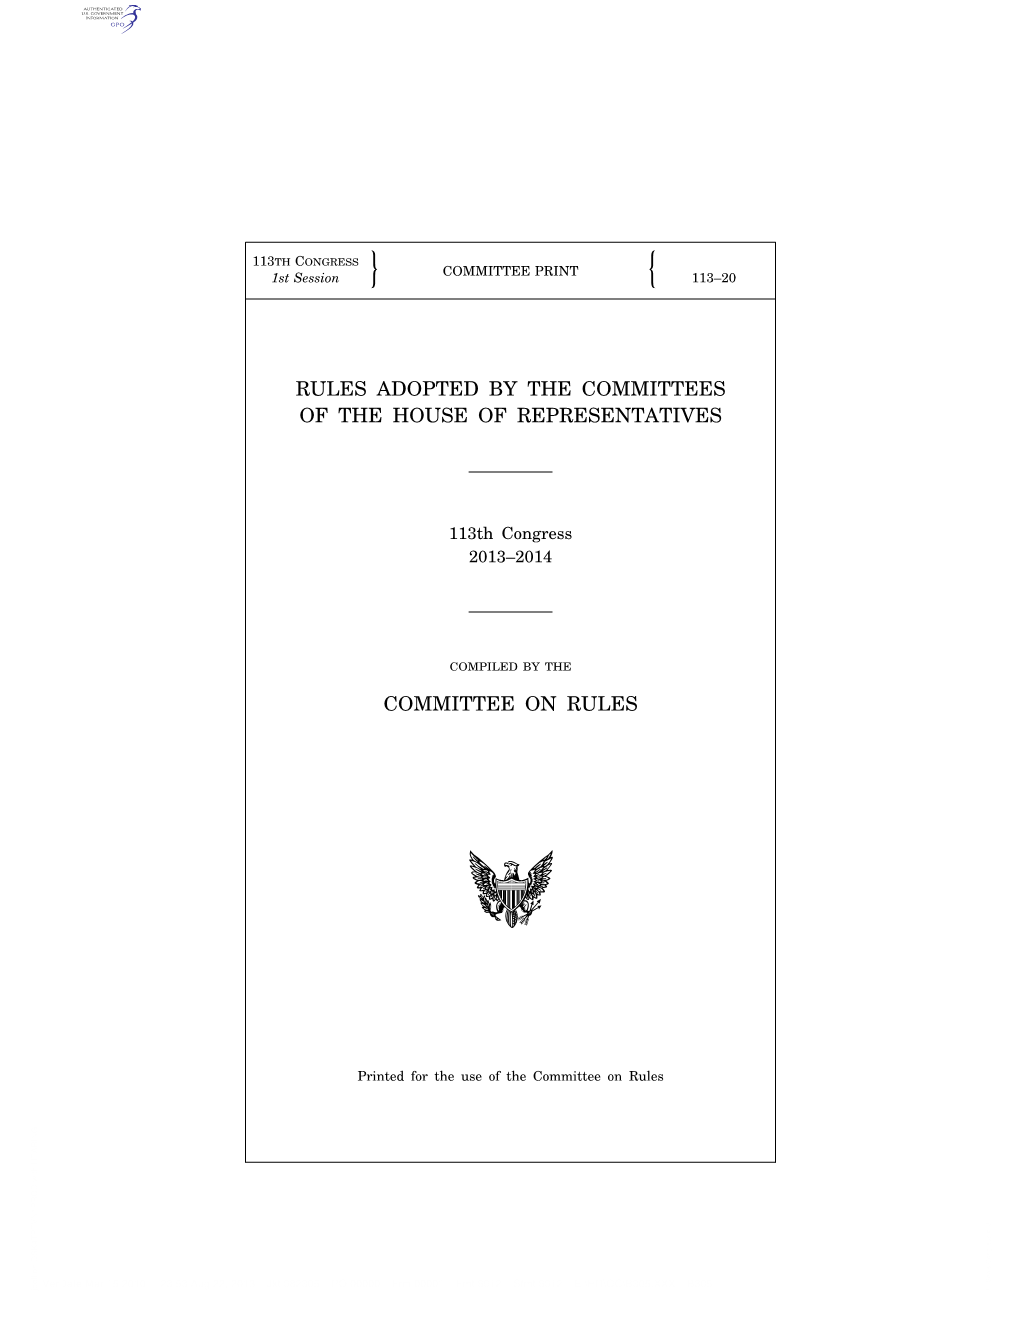 Rules Adopted by the Committees of the House of Representatives